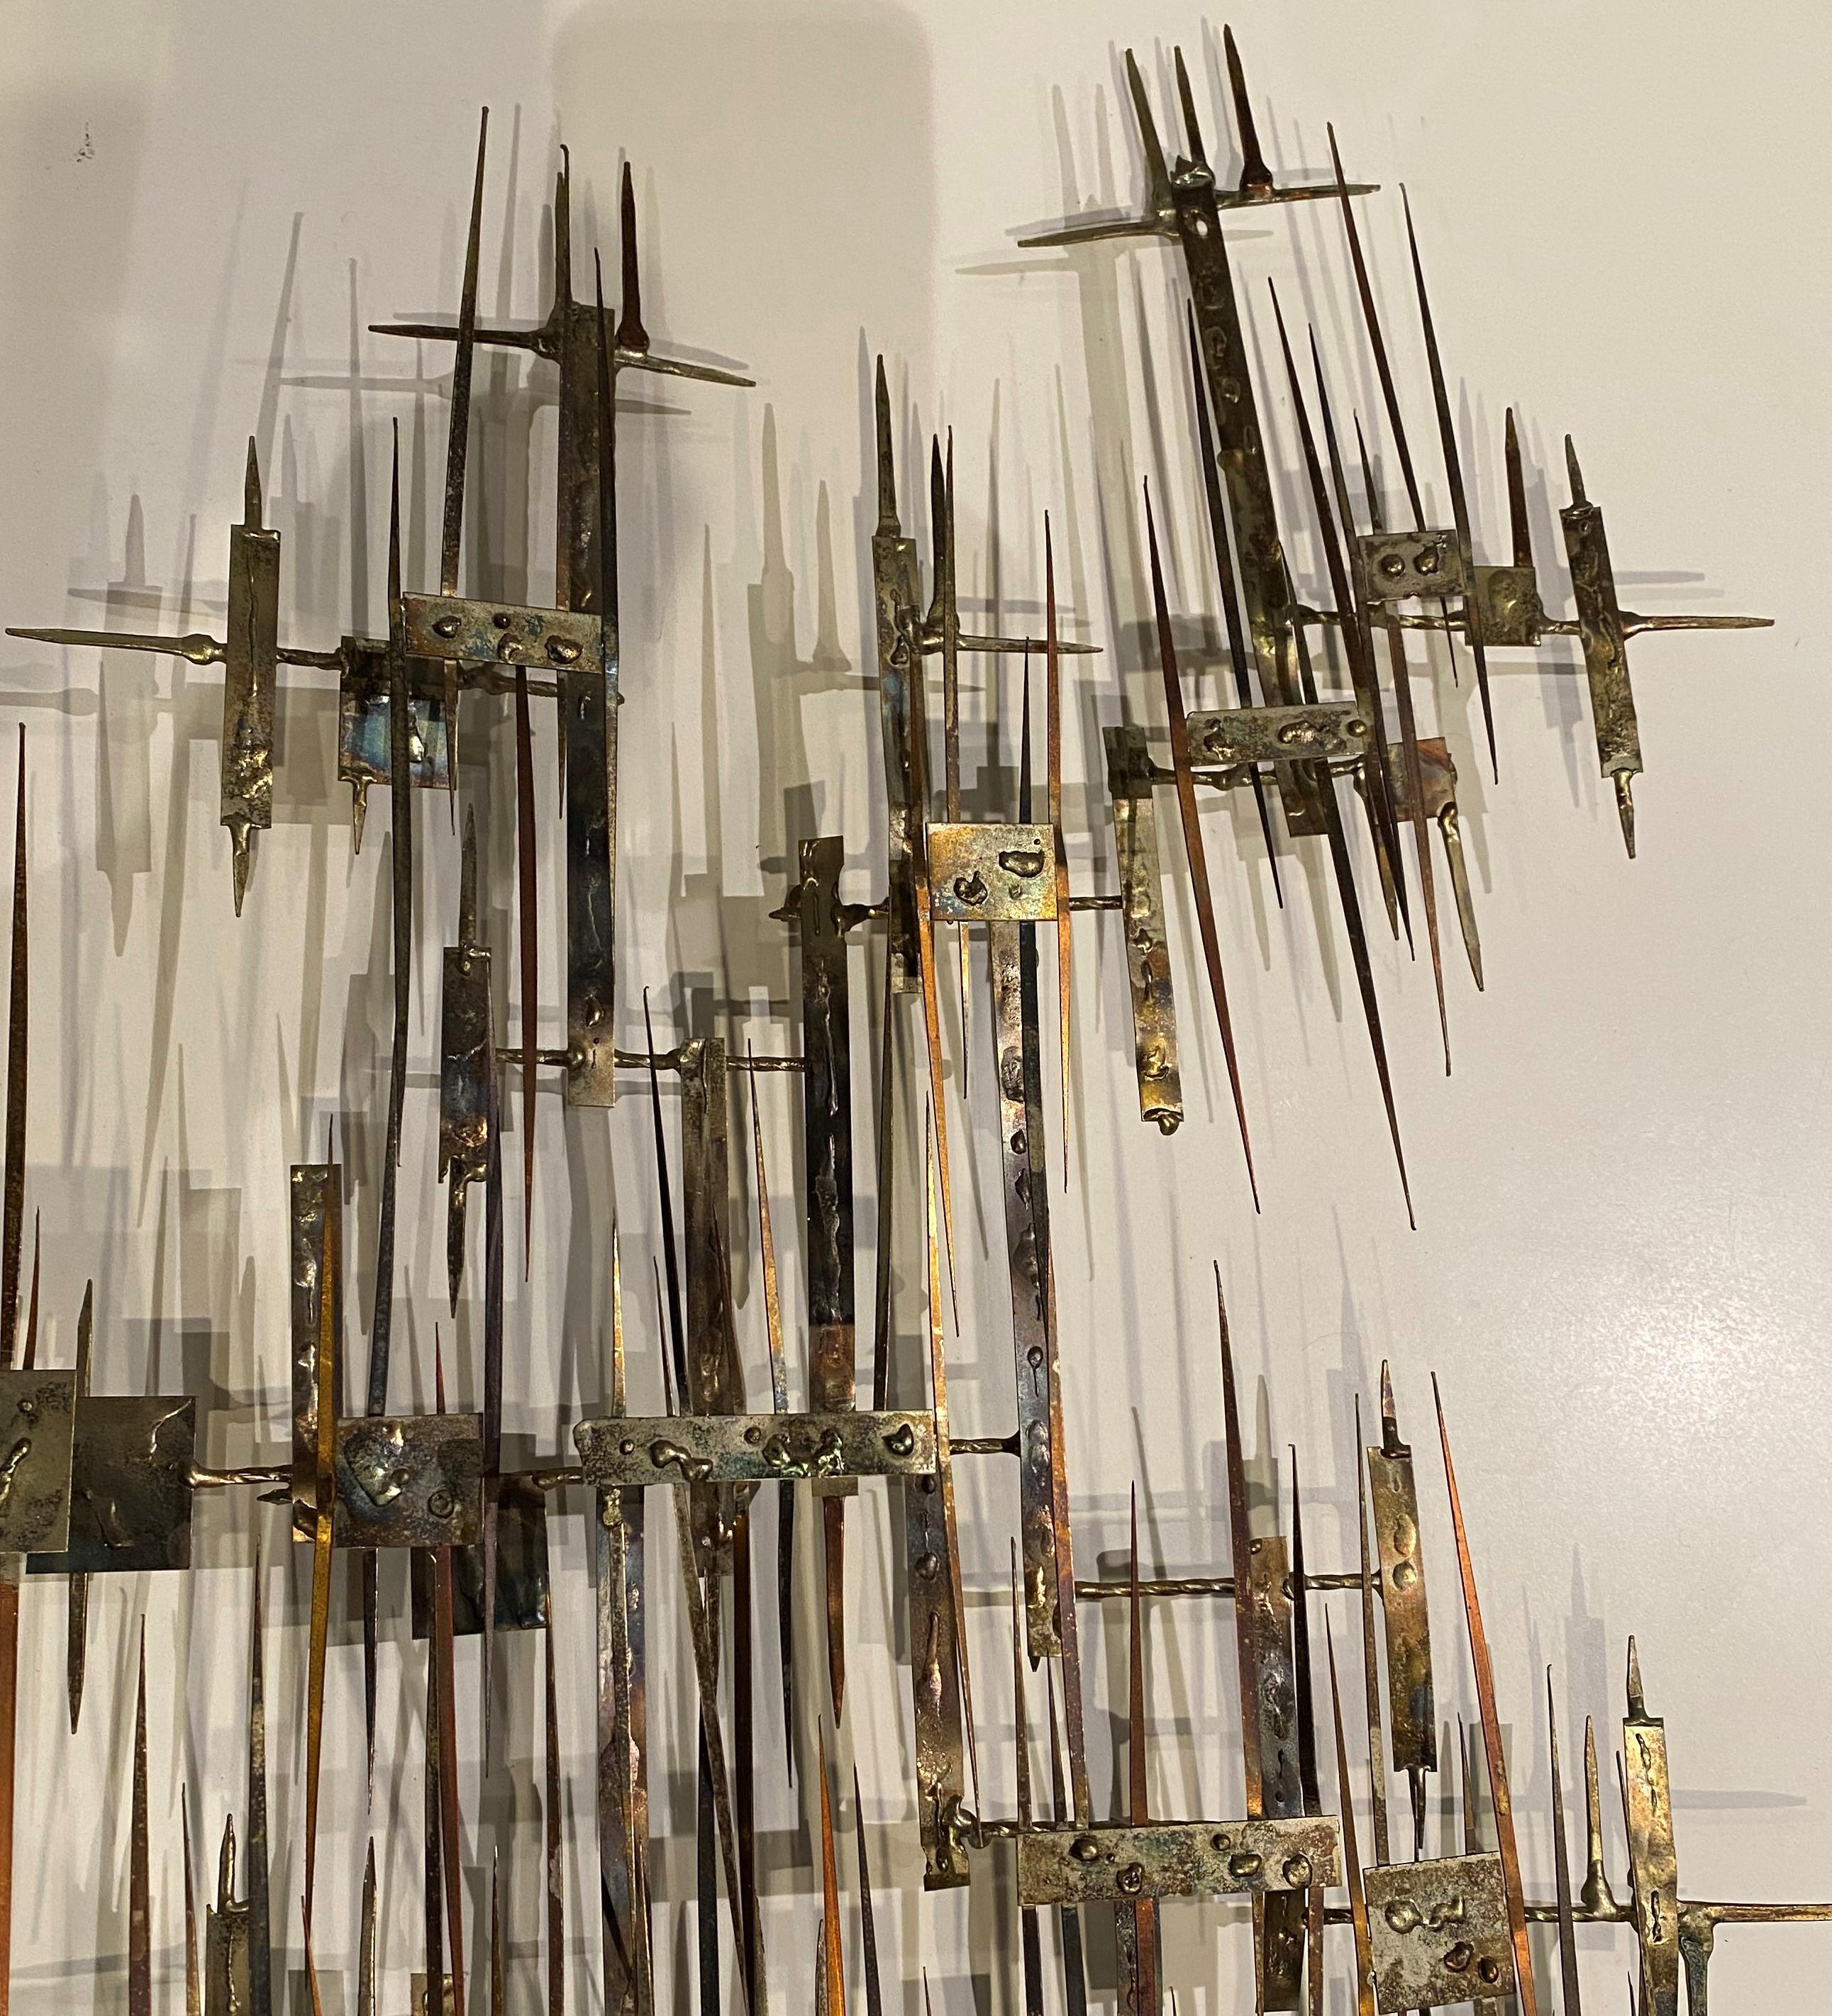 A wonderful abstract brutalist welded and torch cut steel wall sculpture with many points and a burnished finish, by 20th century California artist Tony Melendy, with a signature tag “Melendy” attached. Melendy was an accomplished artist, with